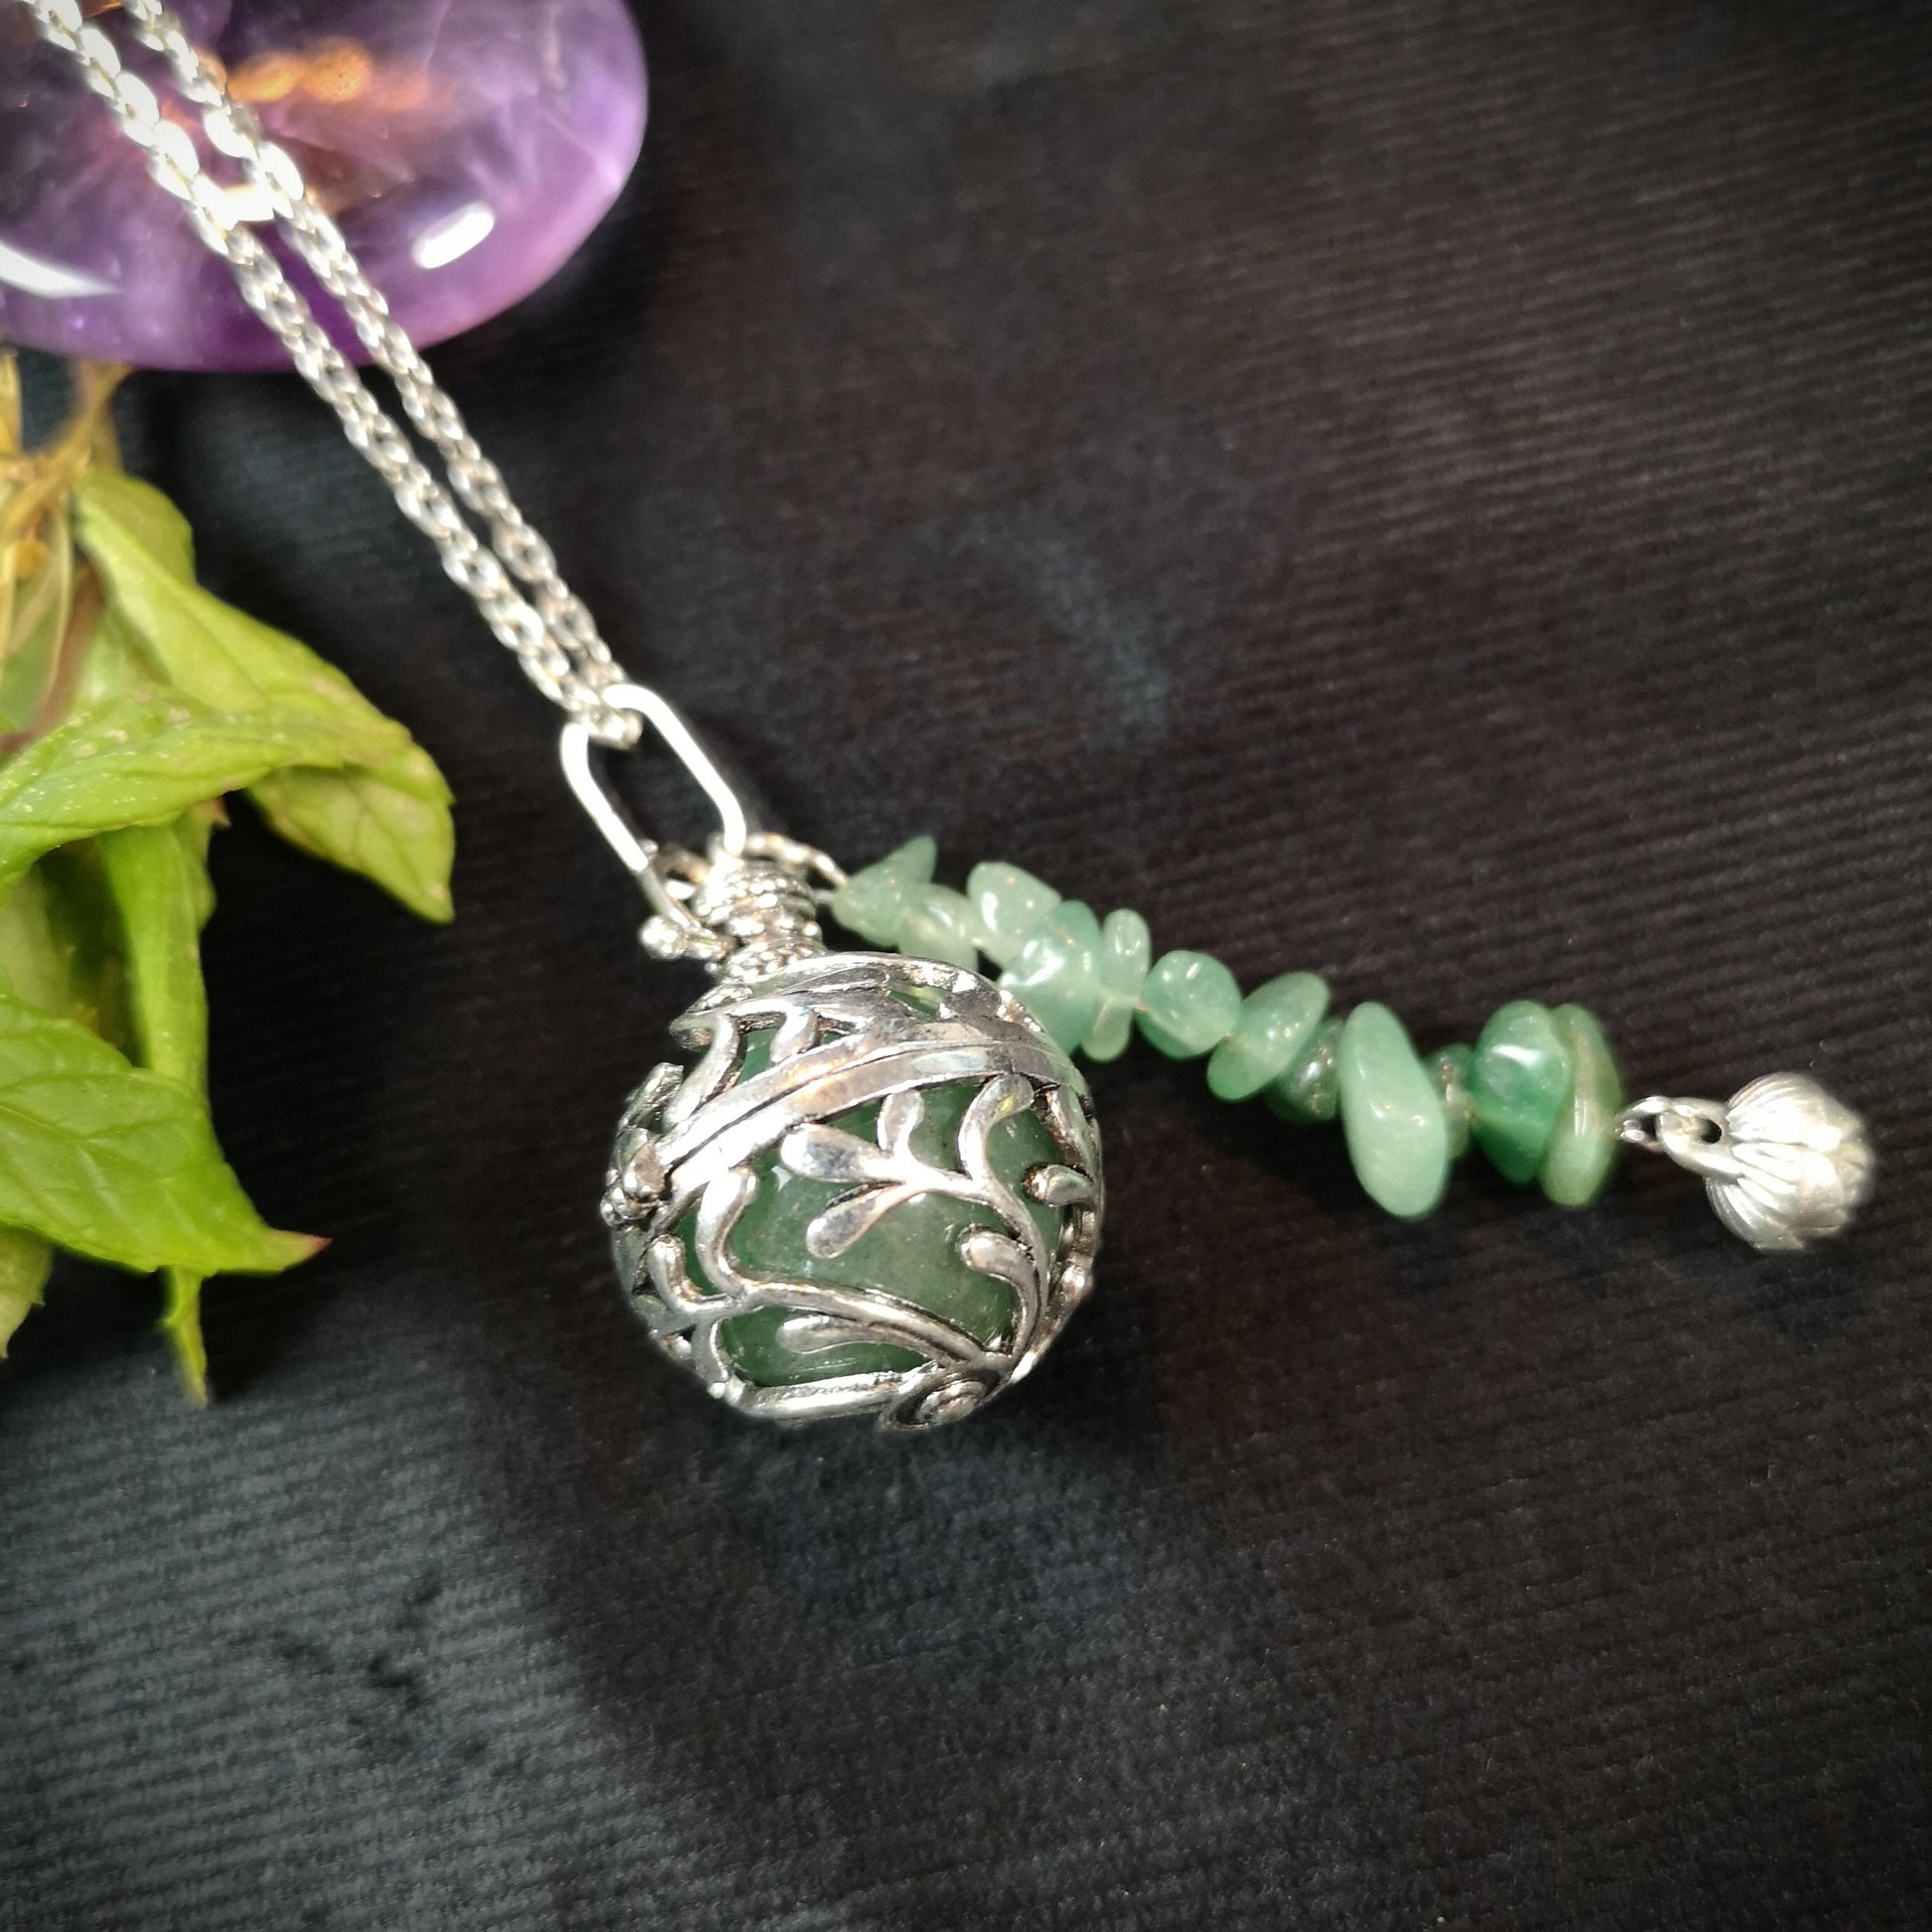 Aventurine locket necklace - The French Witch shop